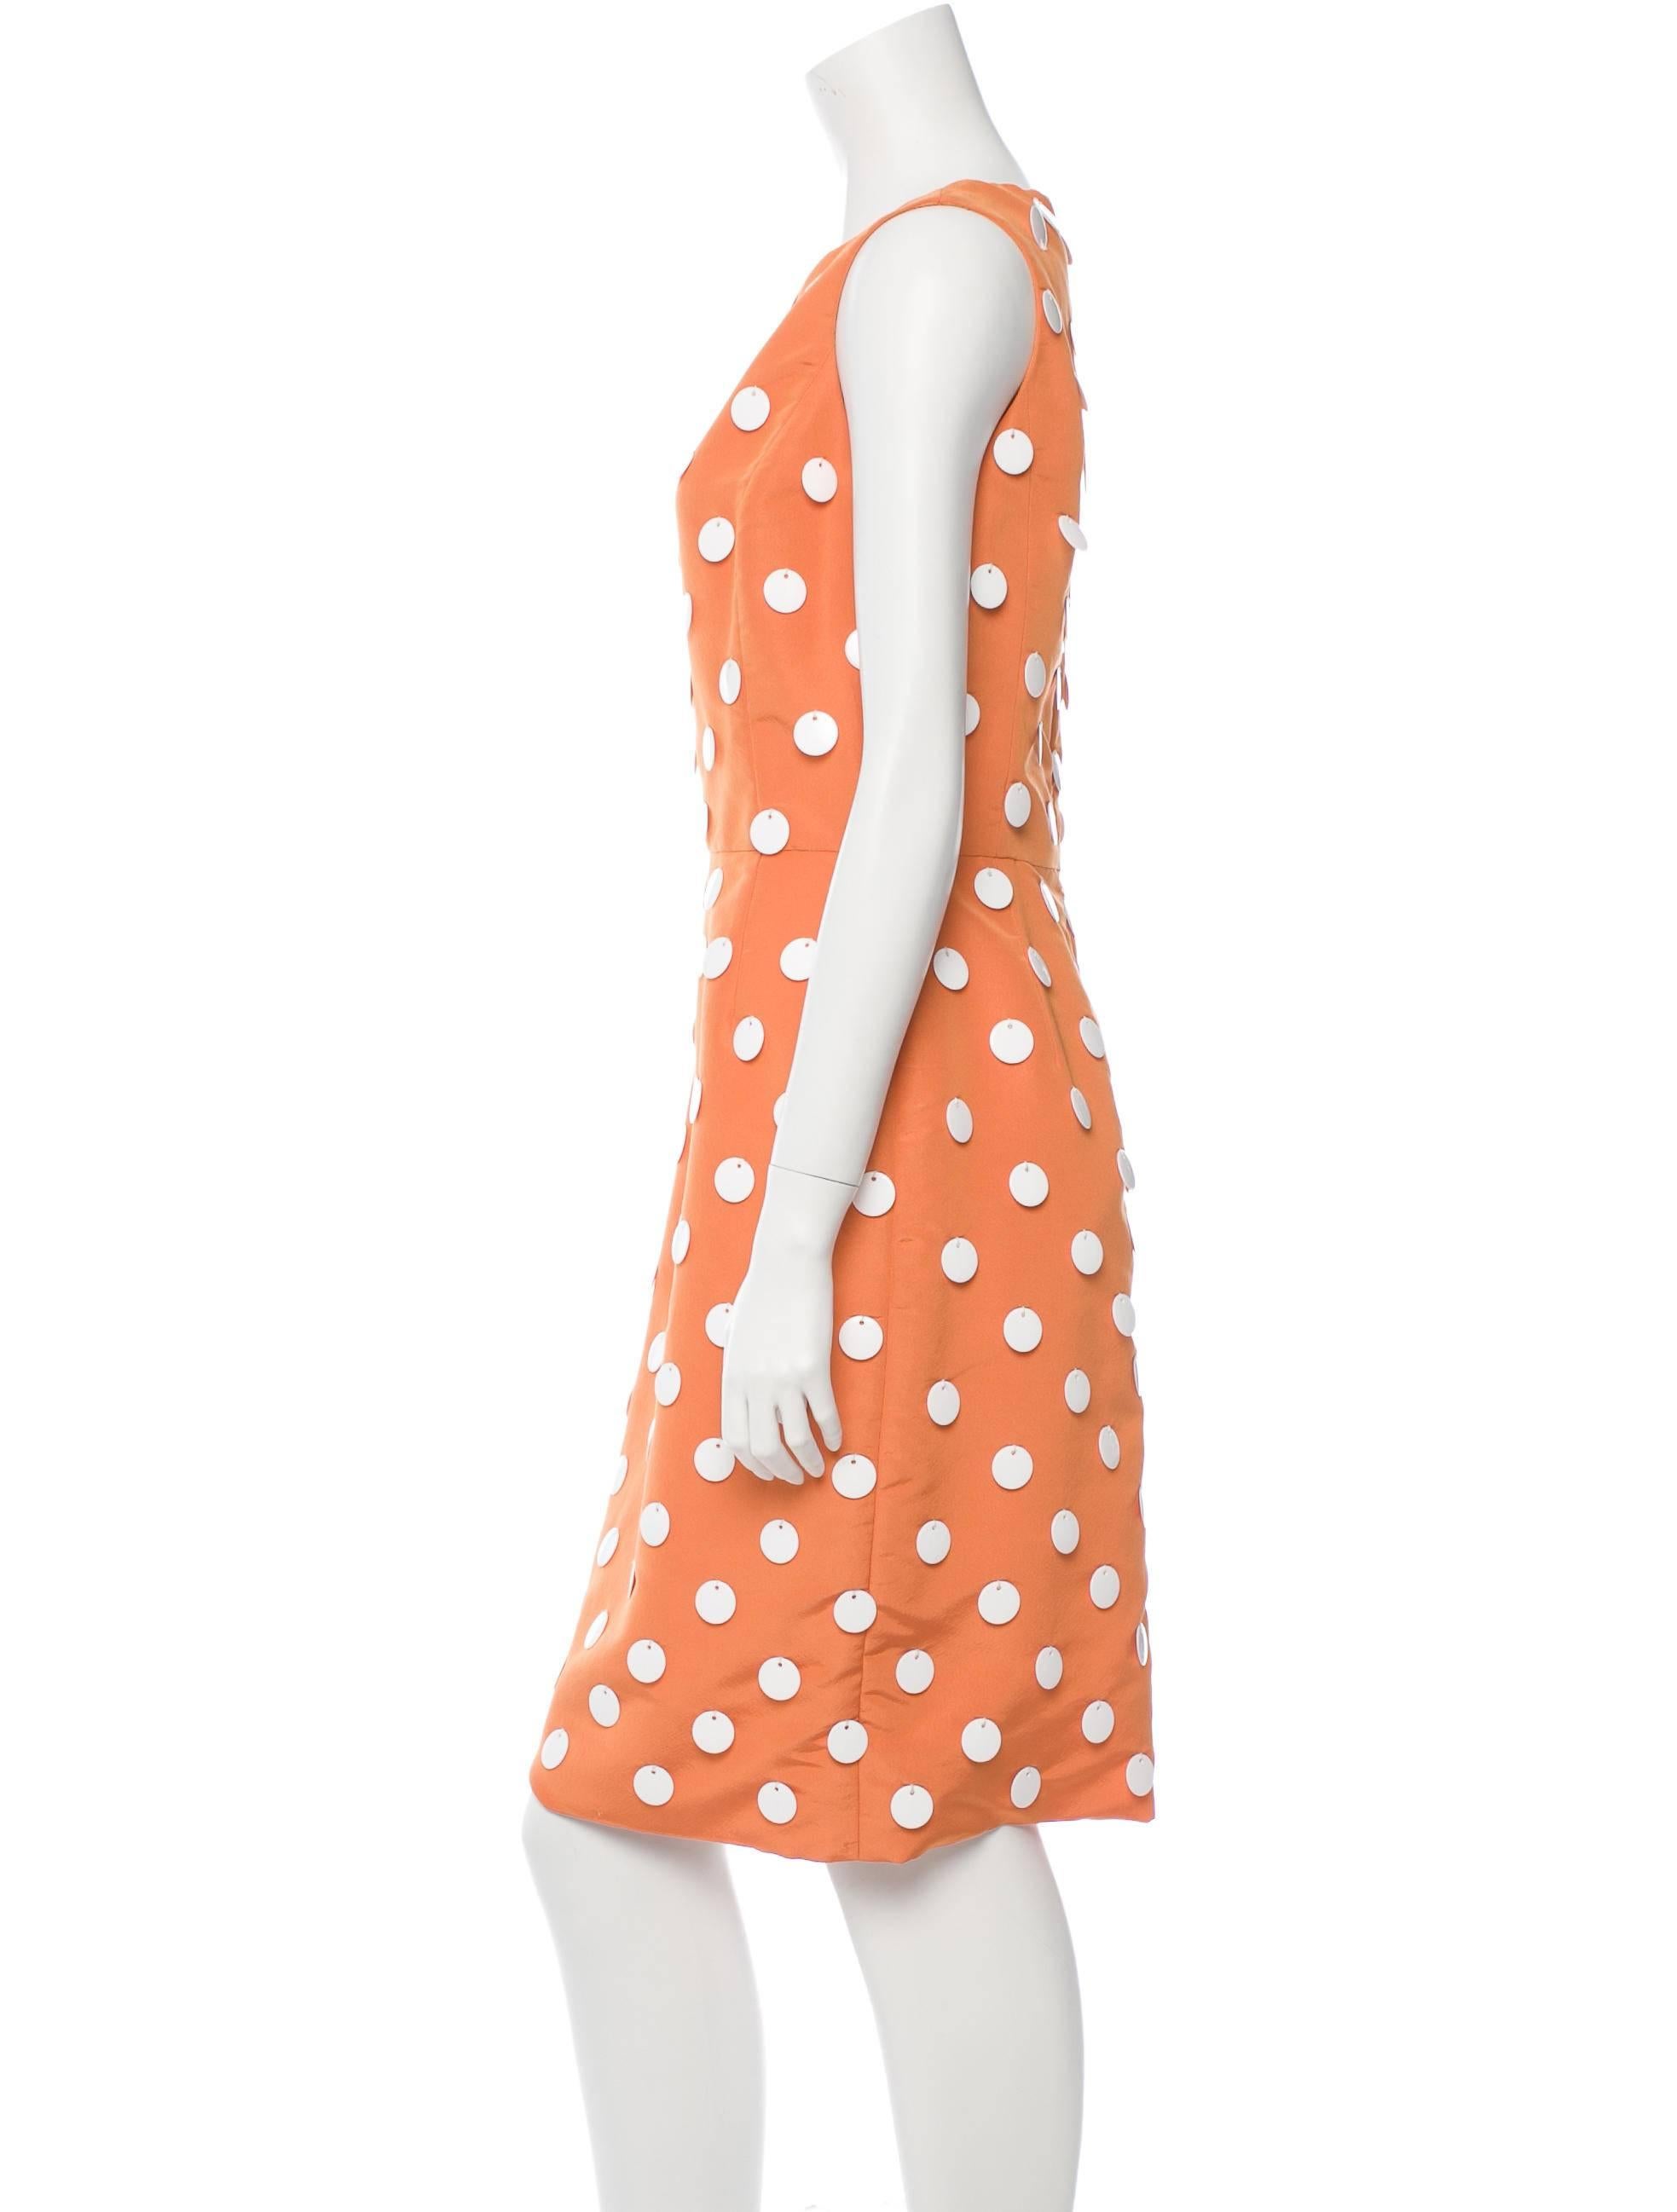 From the Resort 2008 Collection. Orange silk taffeta Oscar de la Renta sleeveless dress with white paillette embellishments throughout, bateau neck and concealed back zip closure.

YOUR PURCHASE BENEFITS THOSE WHO ARE DEVELOPMENTALLY DISABLED.
